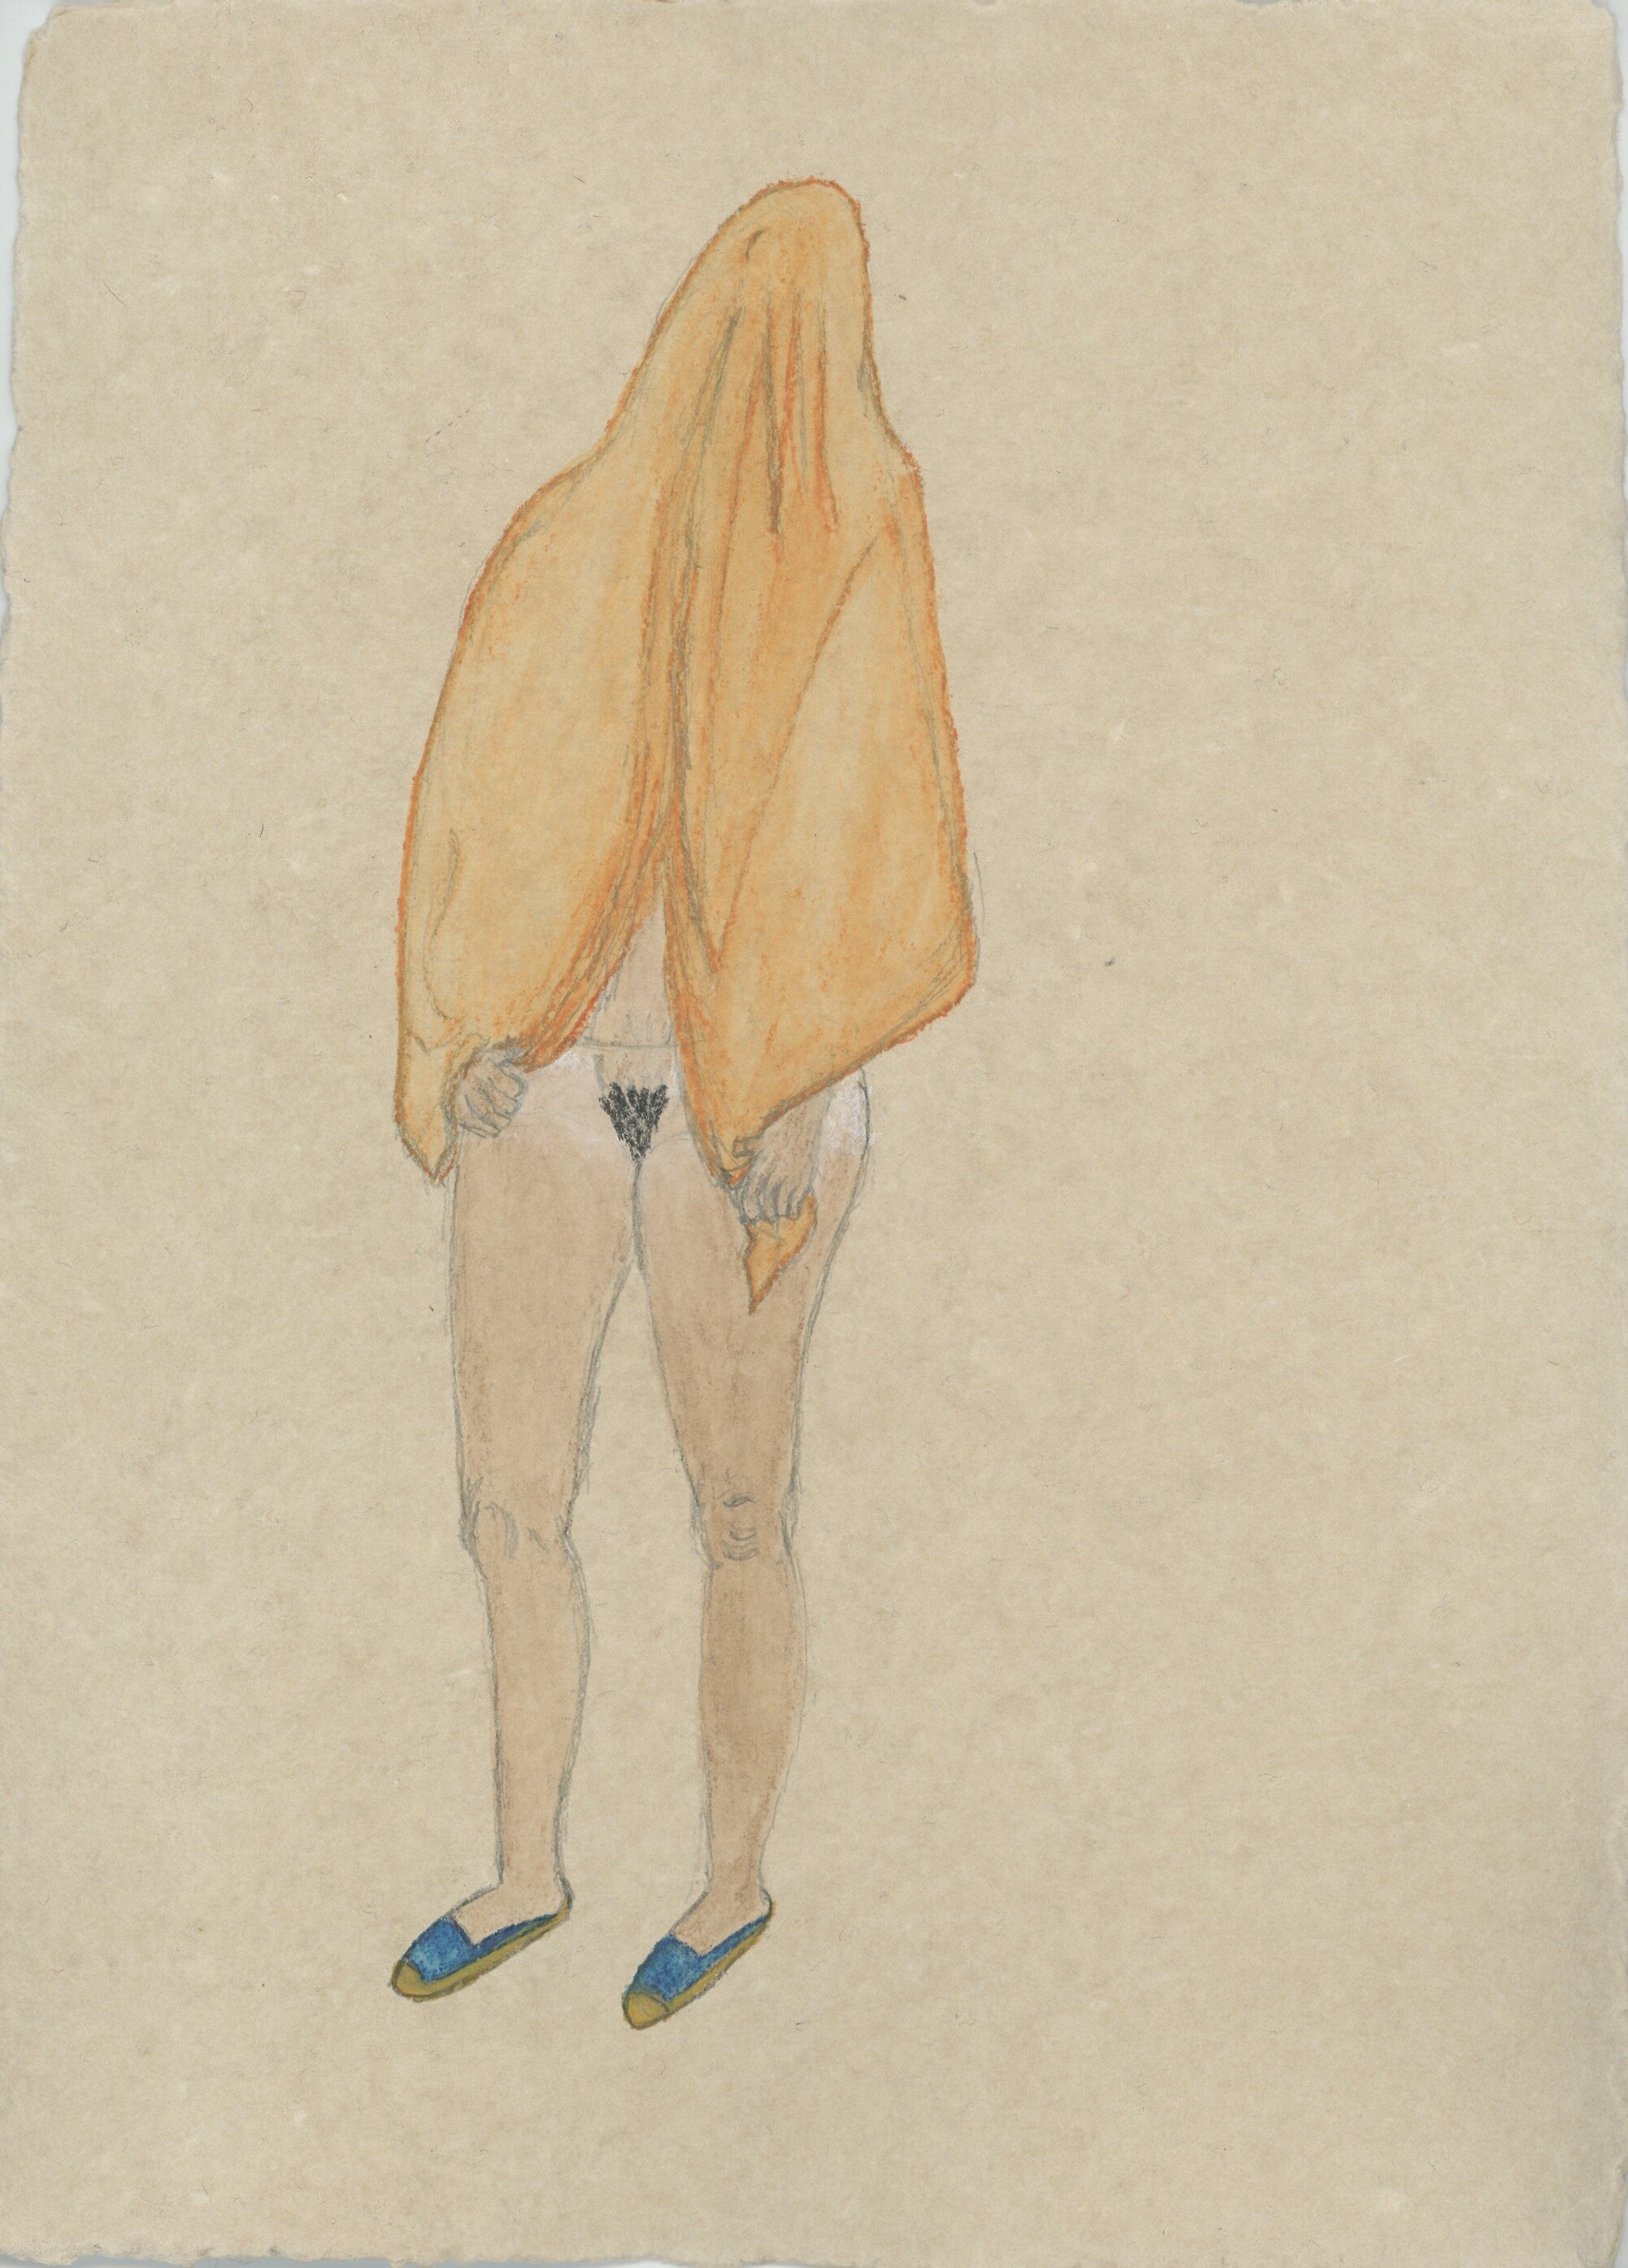 Naked woman covered with a towel,  25.5 x 30 cm, 2019